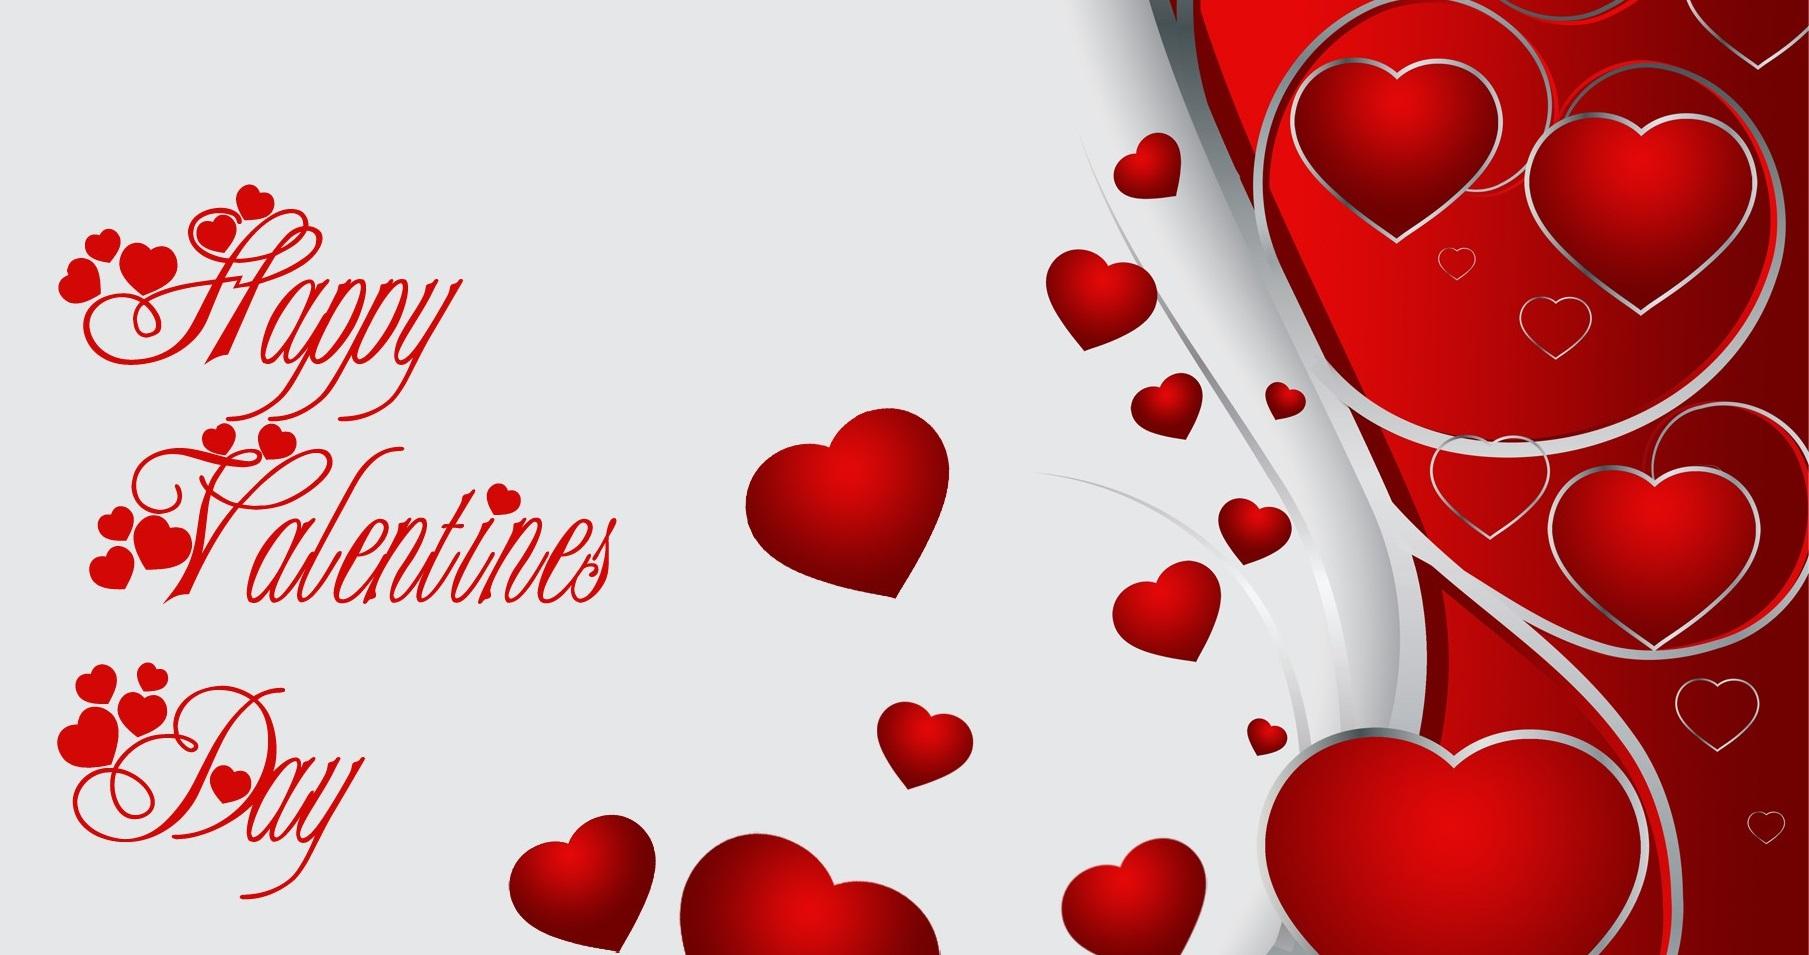 Sweet Lovely Hearts Free Valentine Wallpaper Day Hd